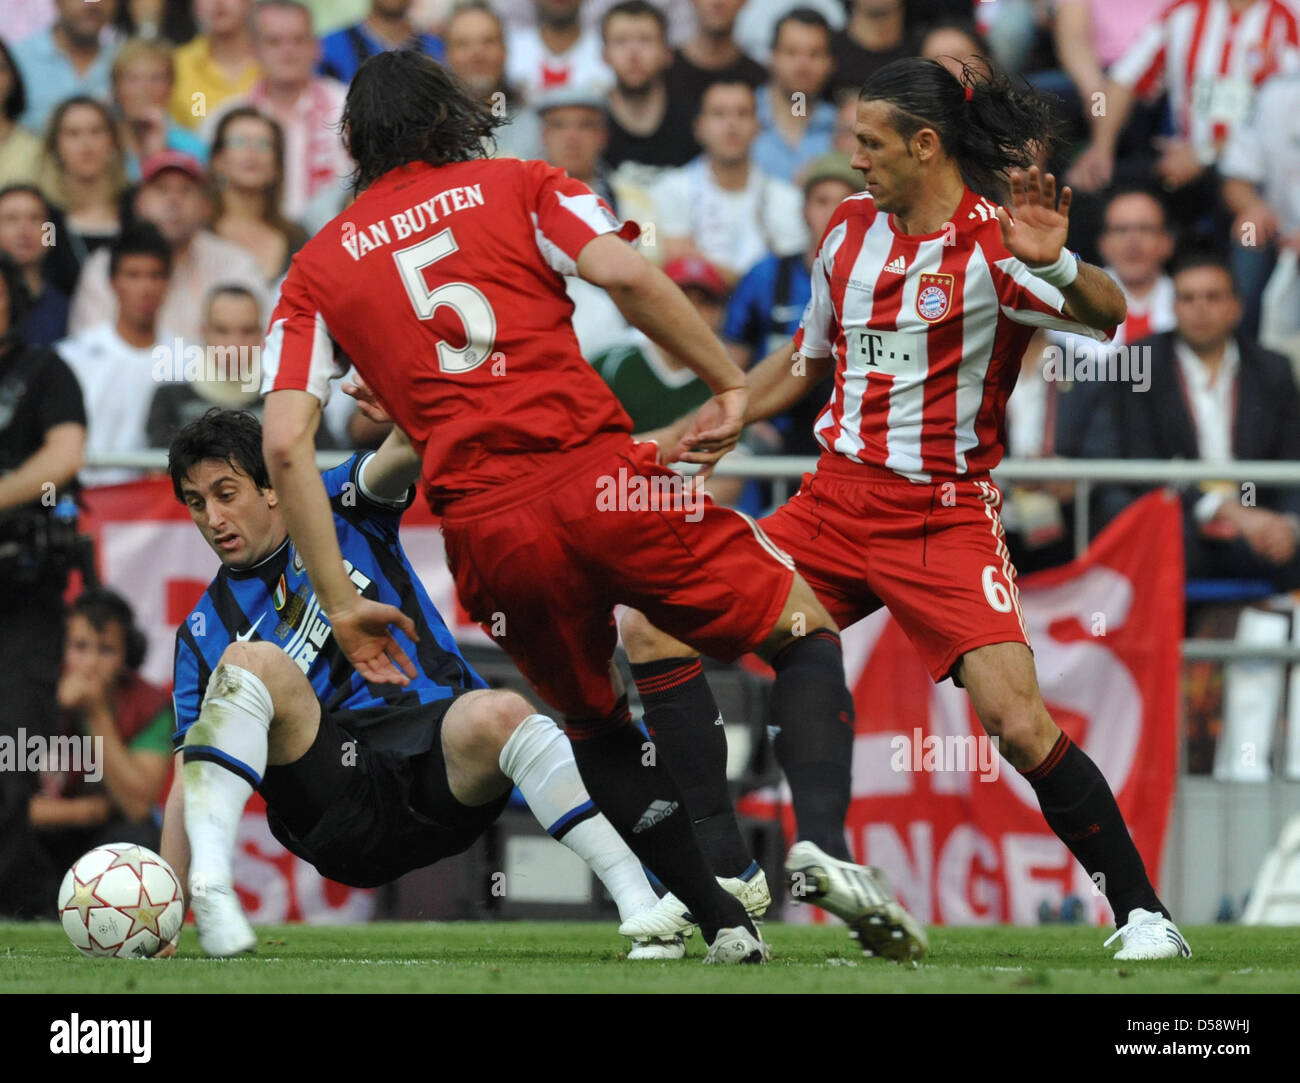 Bayern Munich's Martin Demichelis (R) and Internazionale's Diego Milito (L)  vie for the ball during UEFA Champions League final match FC Bayern Munich  Vs Inter Milan at Bernabeu stadium of Madrid, Spain,